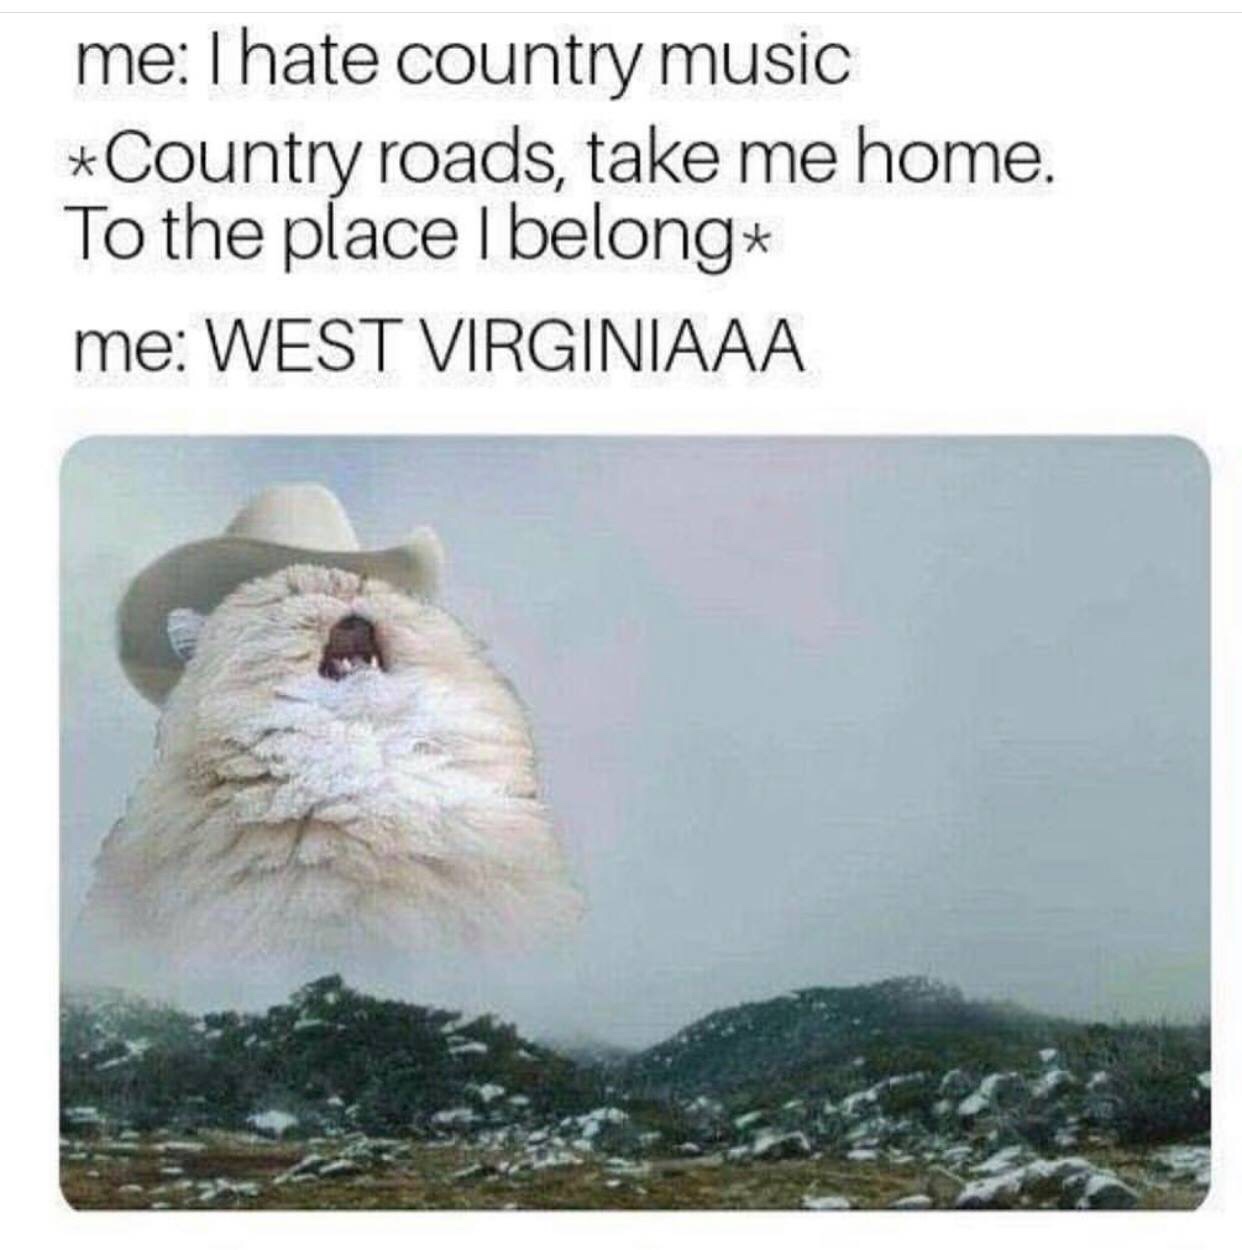 memes - hate country music meme - me Thate country music Country roads, take me home. To the place I belong me West Virginiaaa